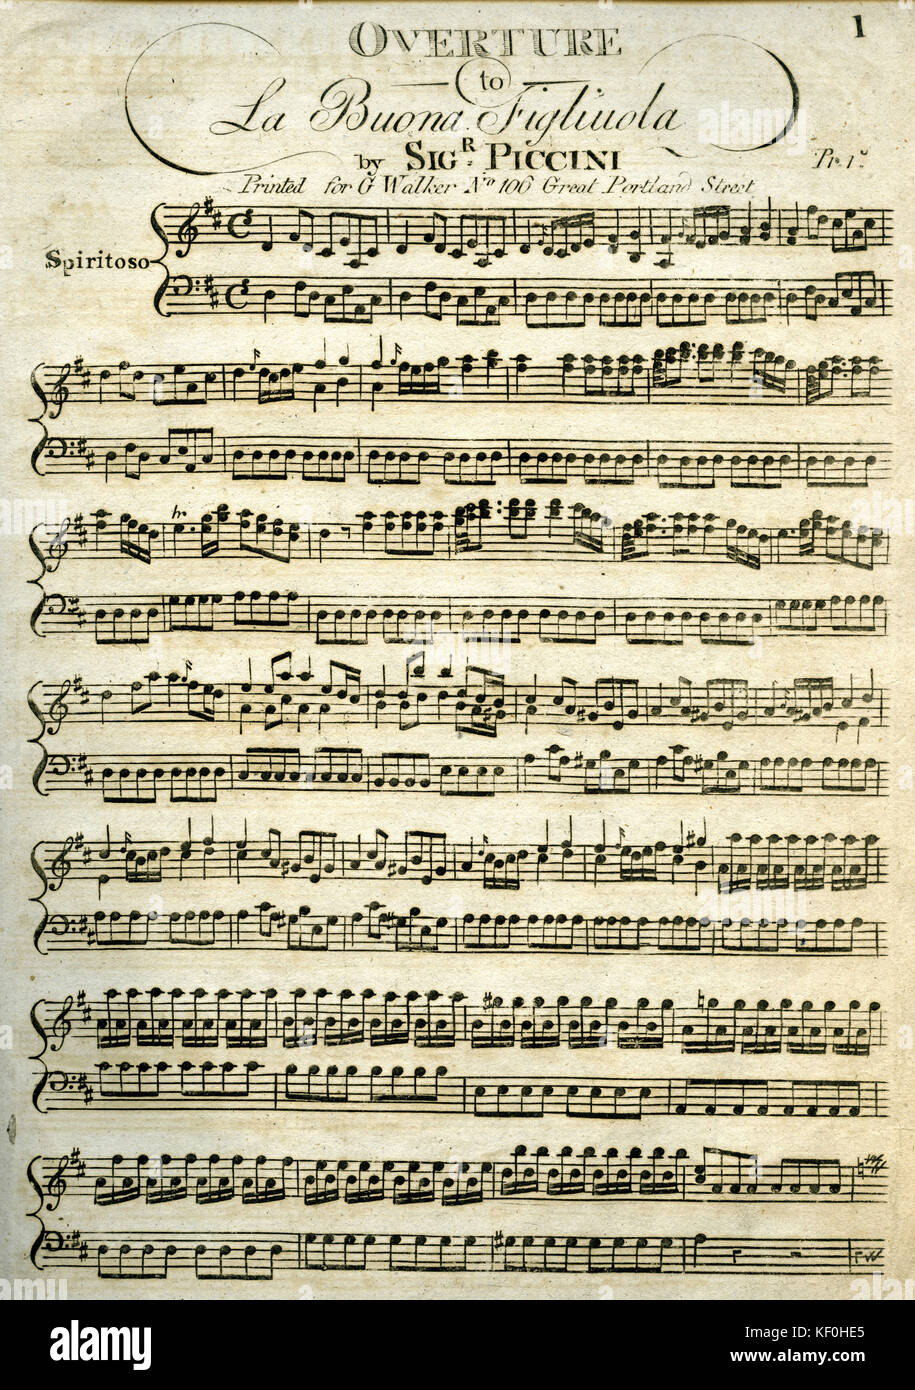 About this Collection, Early American Sheet Music, Digital Collections